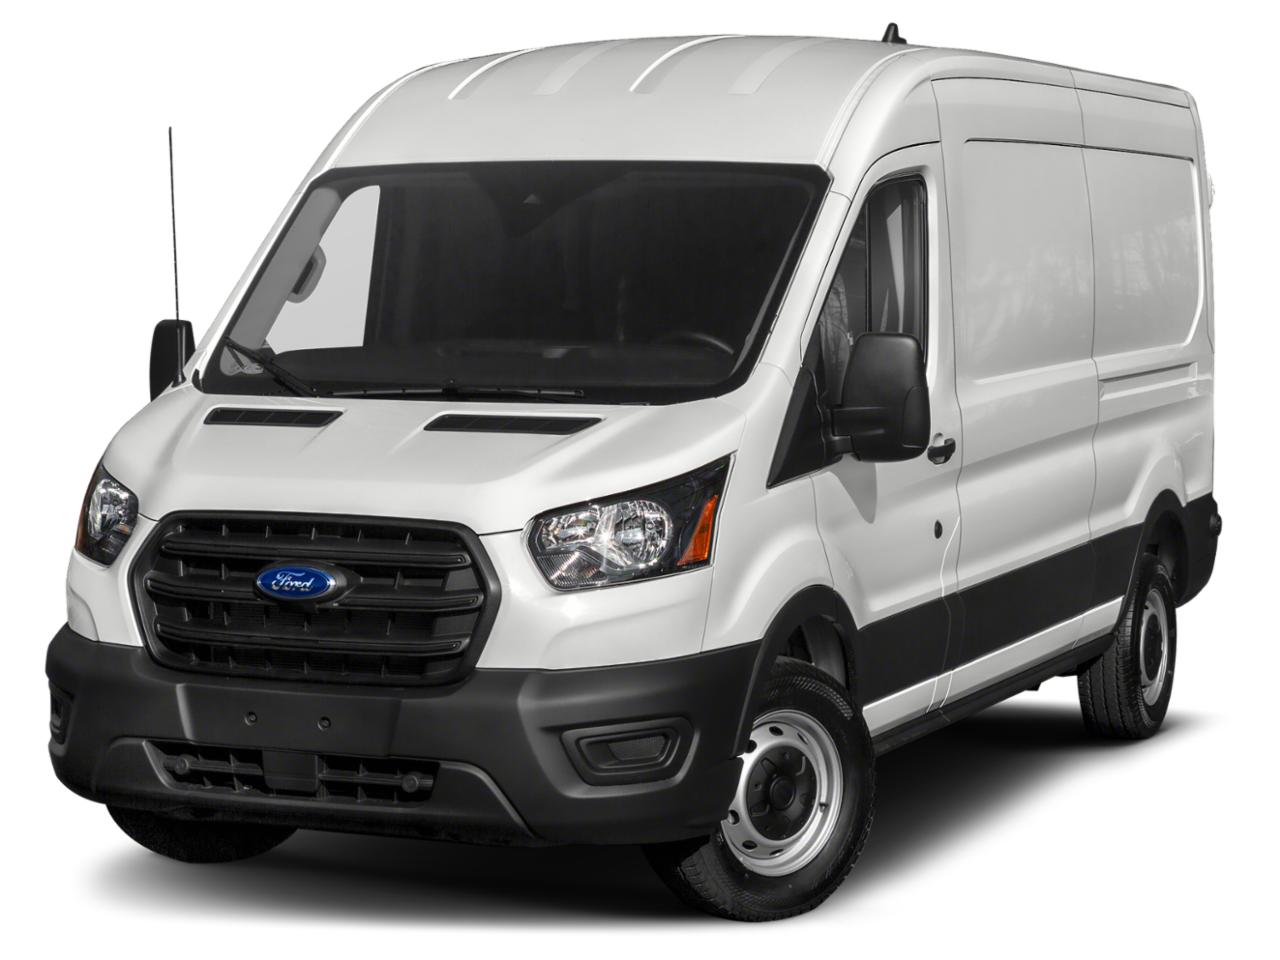 2022 Ford Transit Cargo Van Vehicle Photo in Plainfield, IL 60586